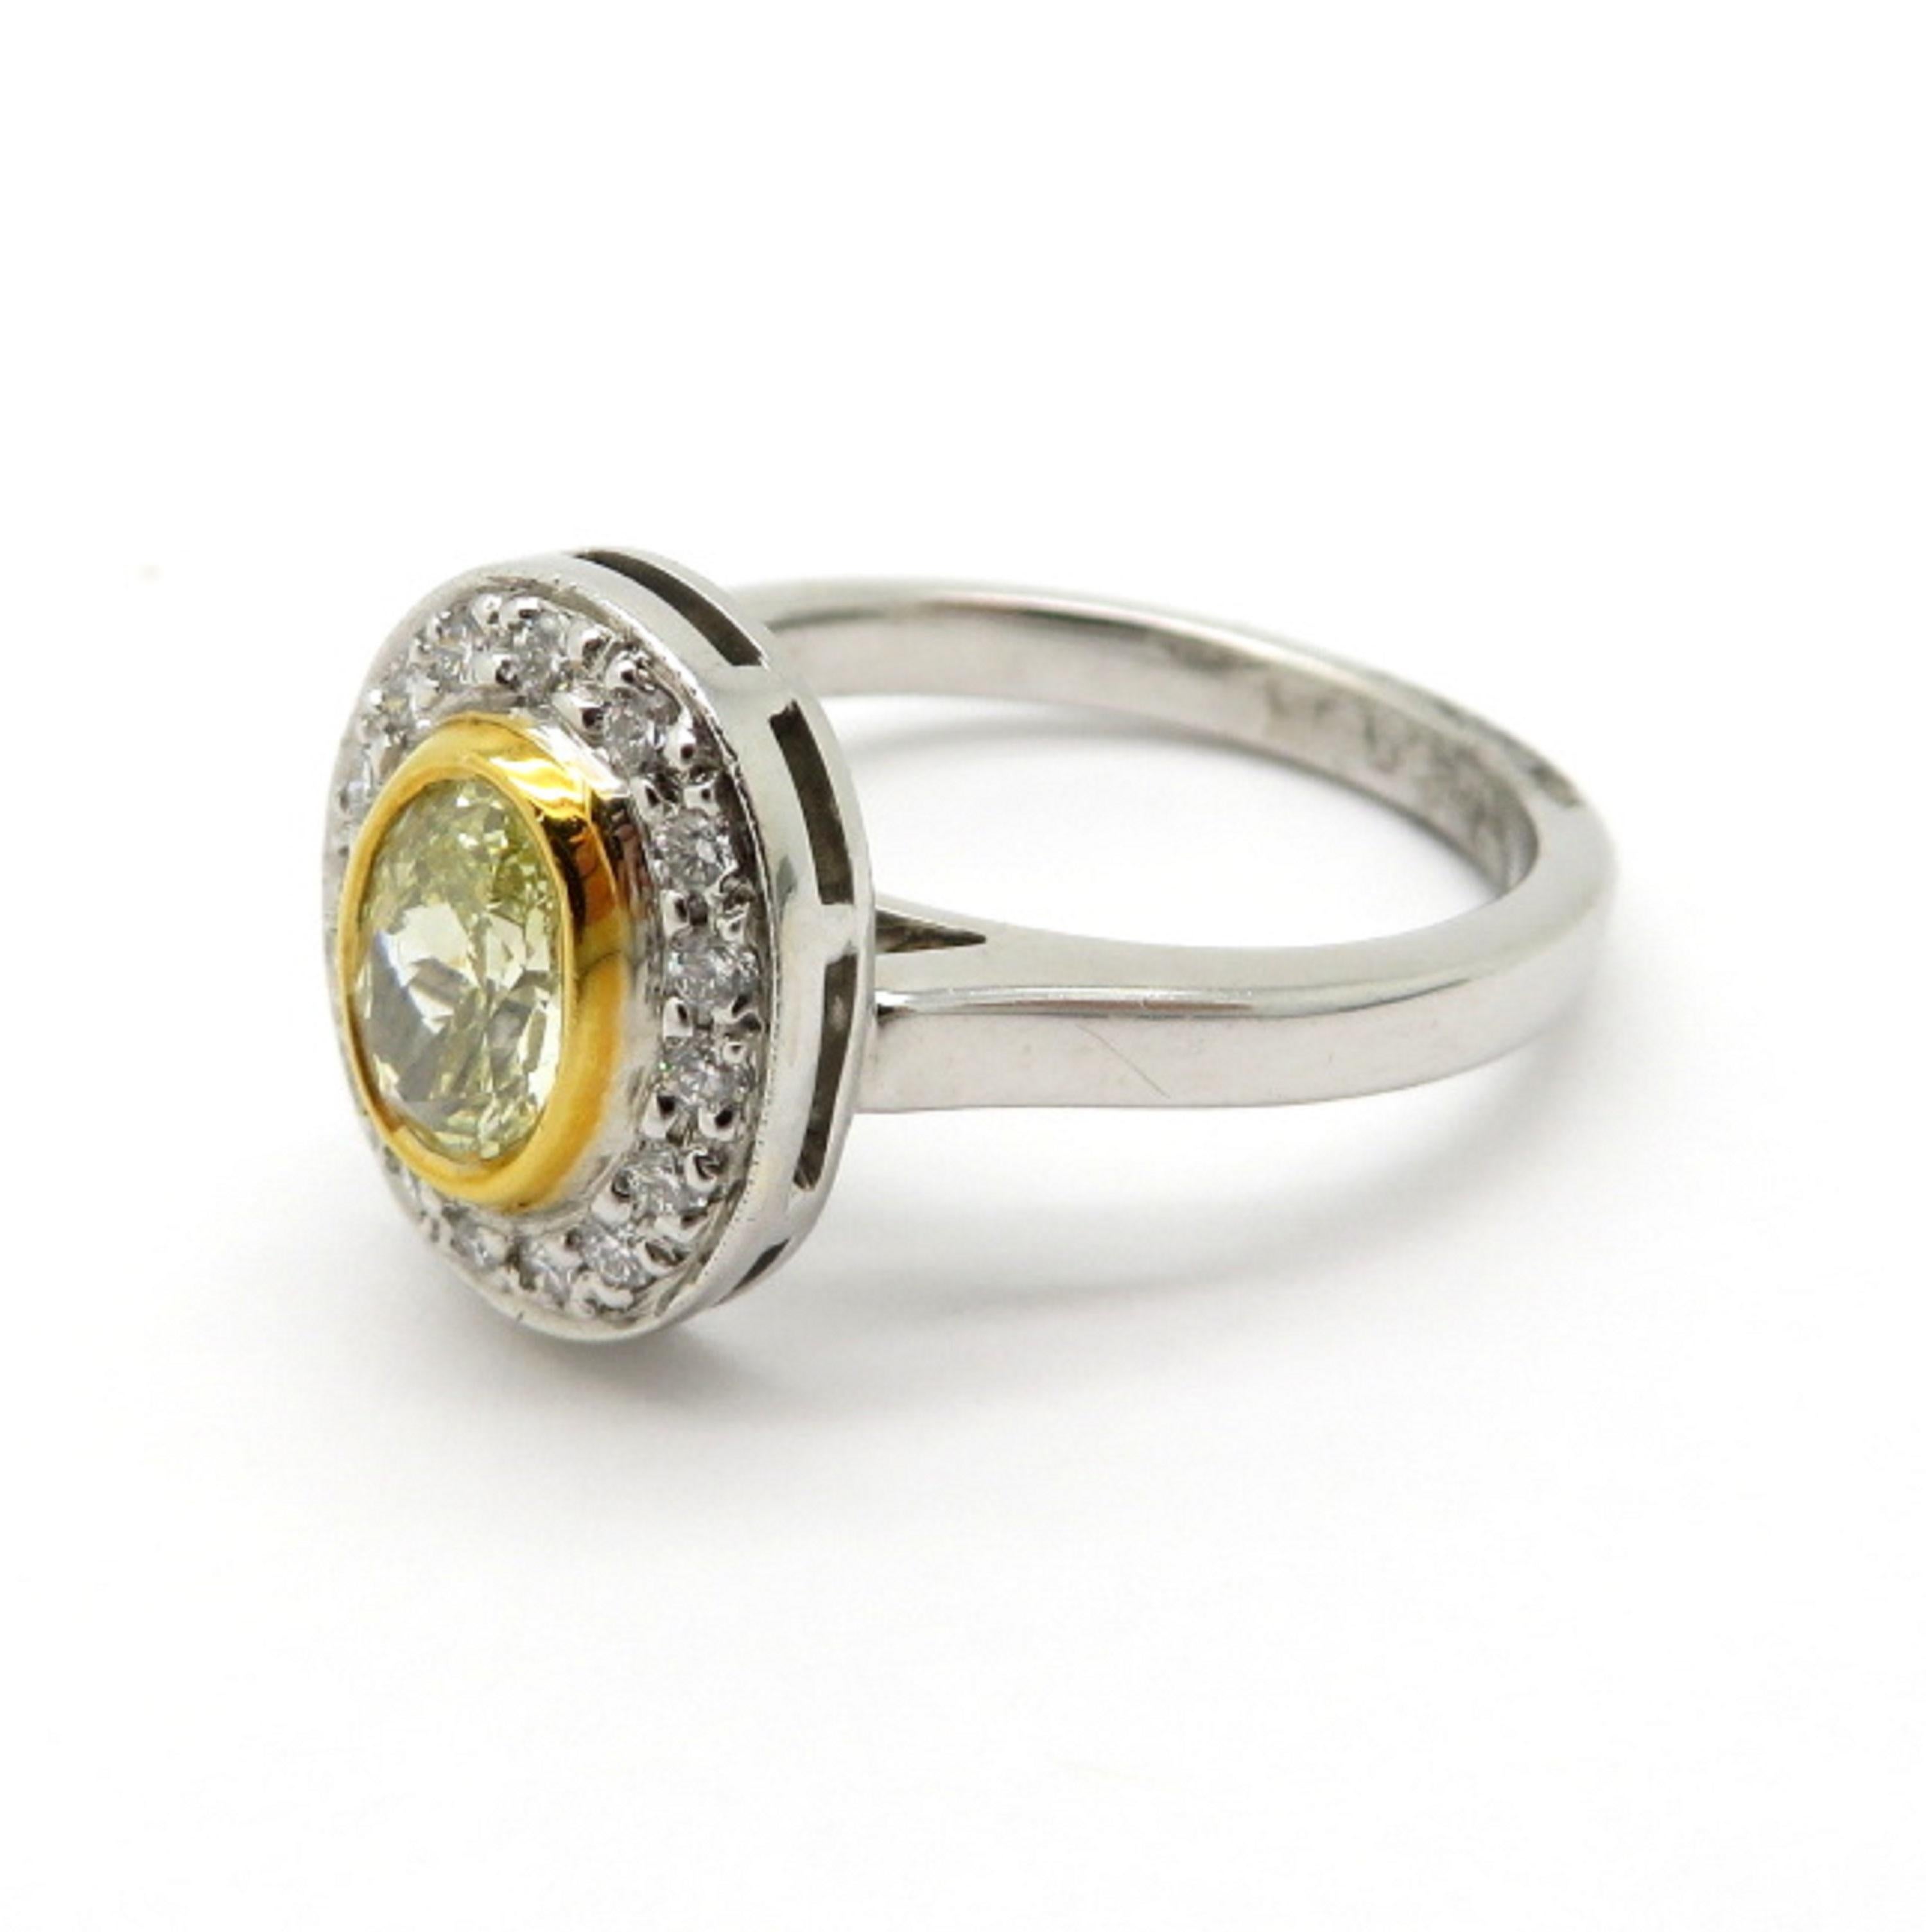 Estate yellow oval diamond halo 18K and platinum ring. Showcasing one oval brilliant cut fancy yellow diamond framed in 18K yellow gold having VS1 clarity grade weighing approximately 0.66 carats. Interspersed with 18 round brilliant cut diamonds